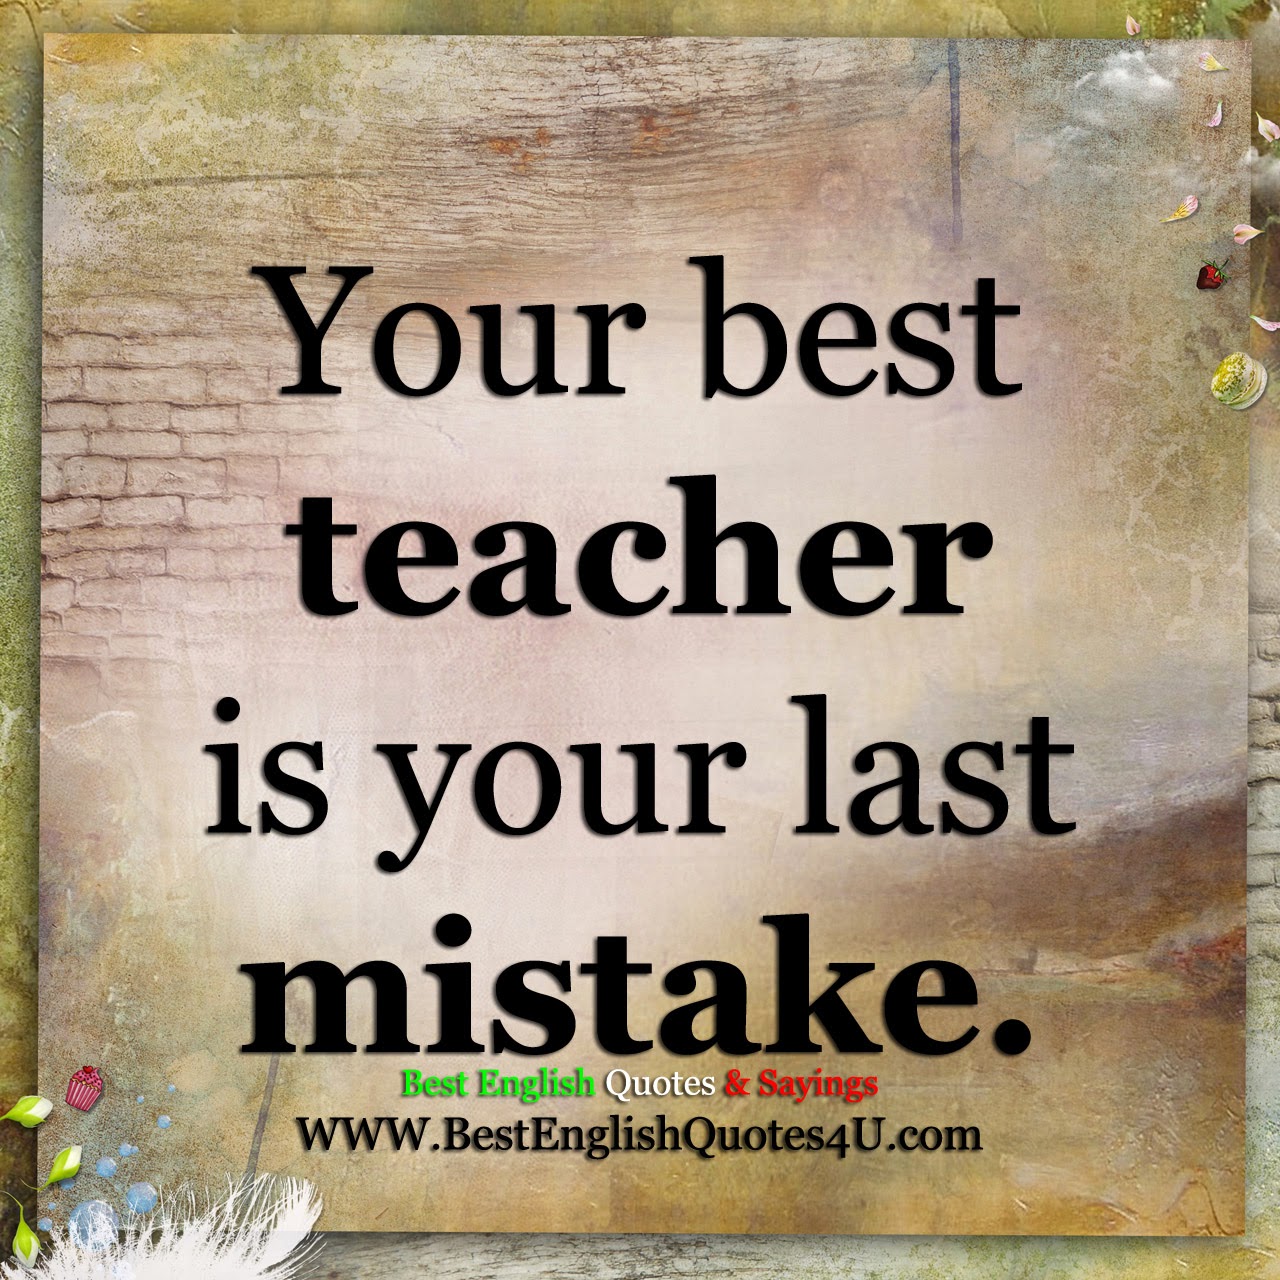 Your best teacher... | Best English Quotes And Sayings